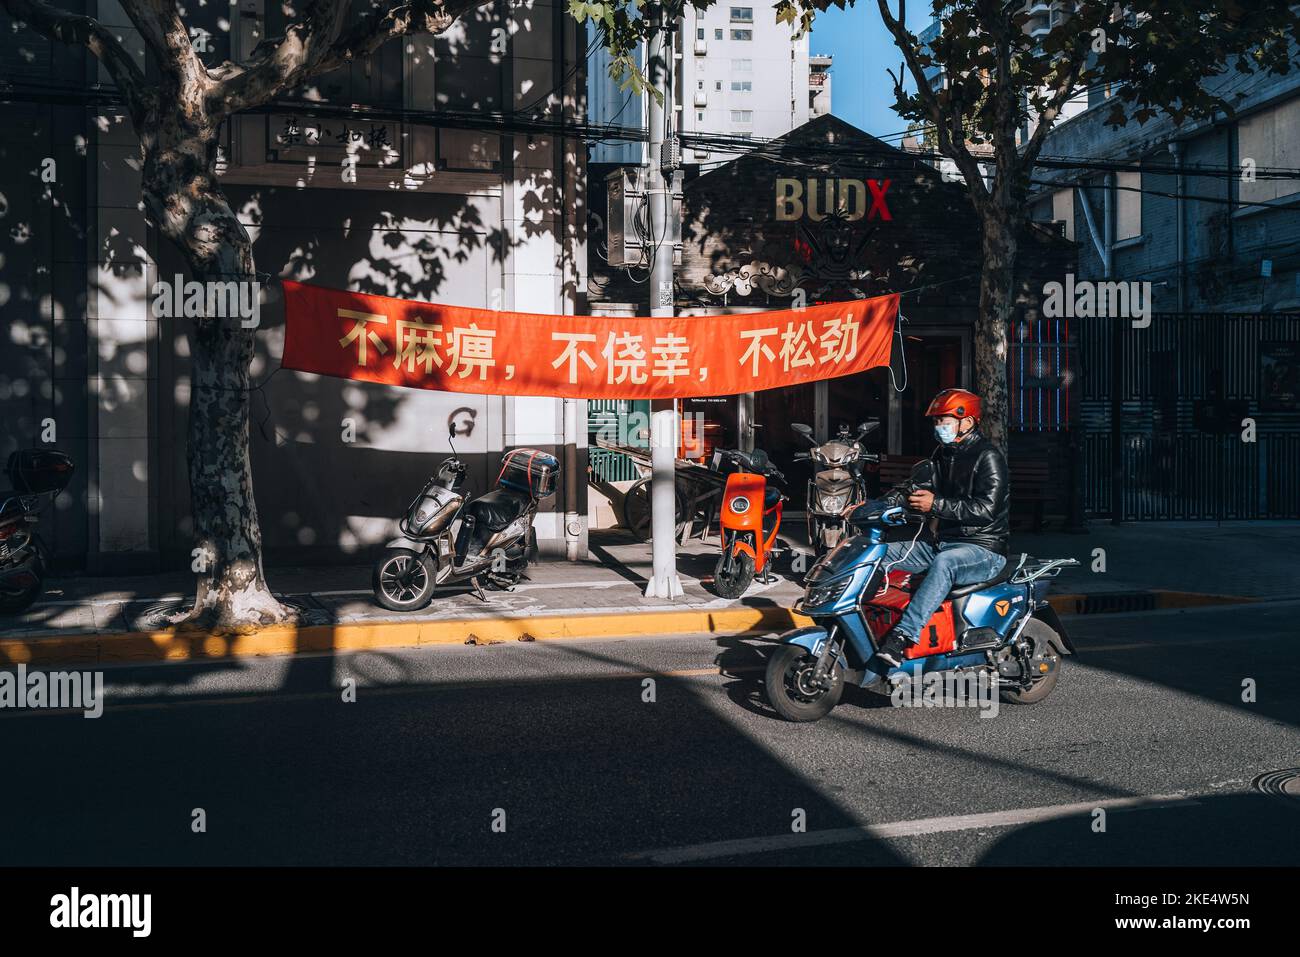 A man driving a scooter in the streets of the old neighborhoods of Shanghai's Former French Concession with a sign in the background Stock Photo